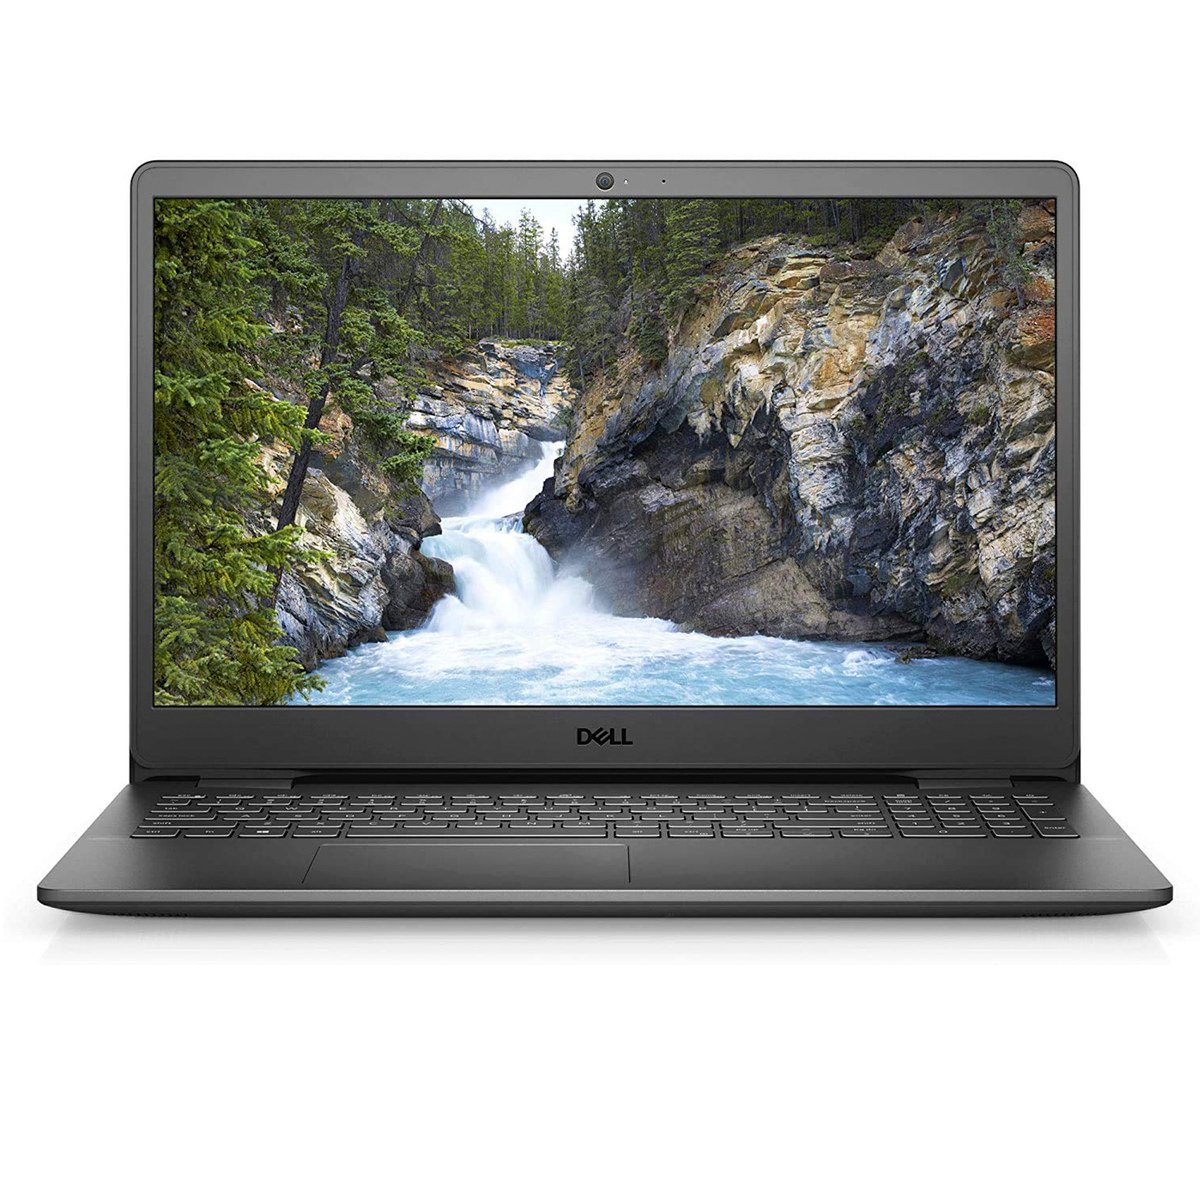 Dell Inspiron 3501 15.6-inch FHD Laptop,Core™ i3-1005G1 Processor, 4GBRAM, 1TB HDD,Intel® UHD Graphics with shared graphics , Win10 15.6inch FHD ,Silver